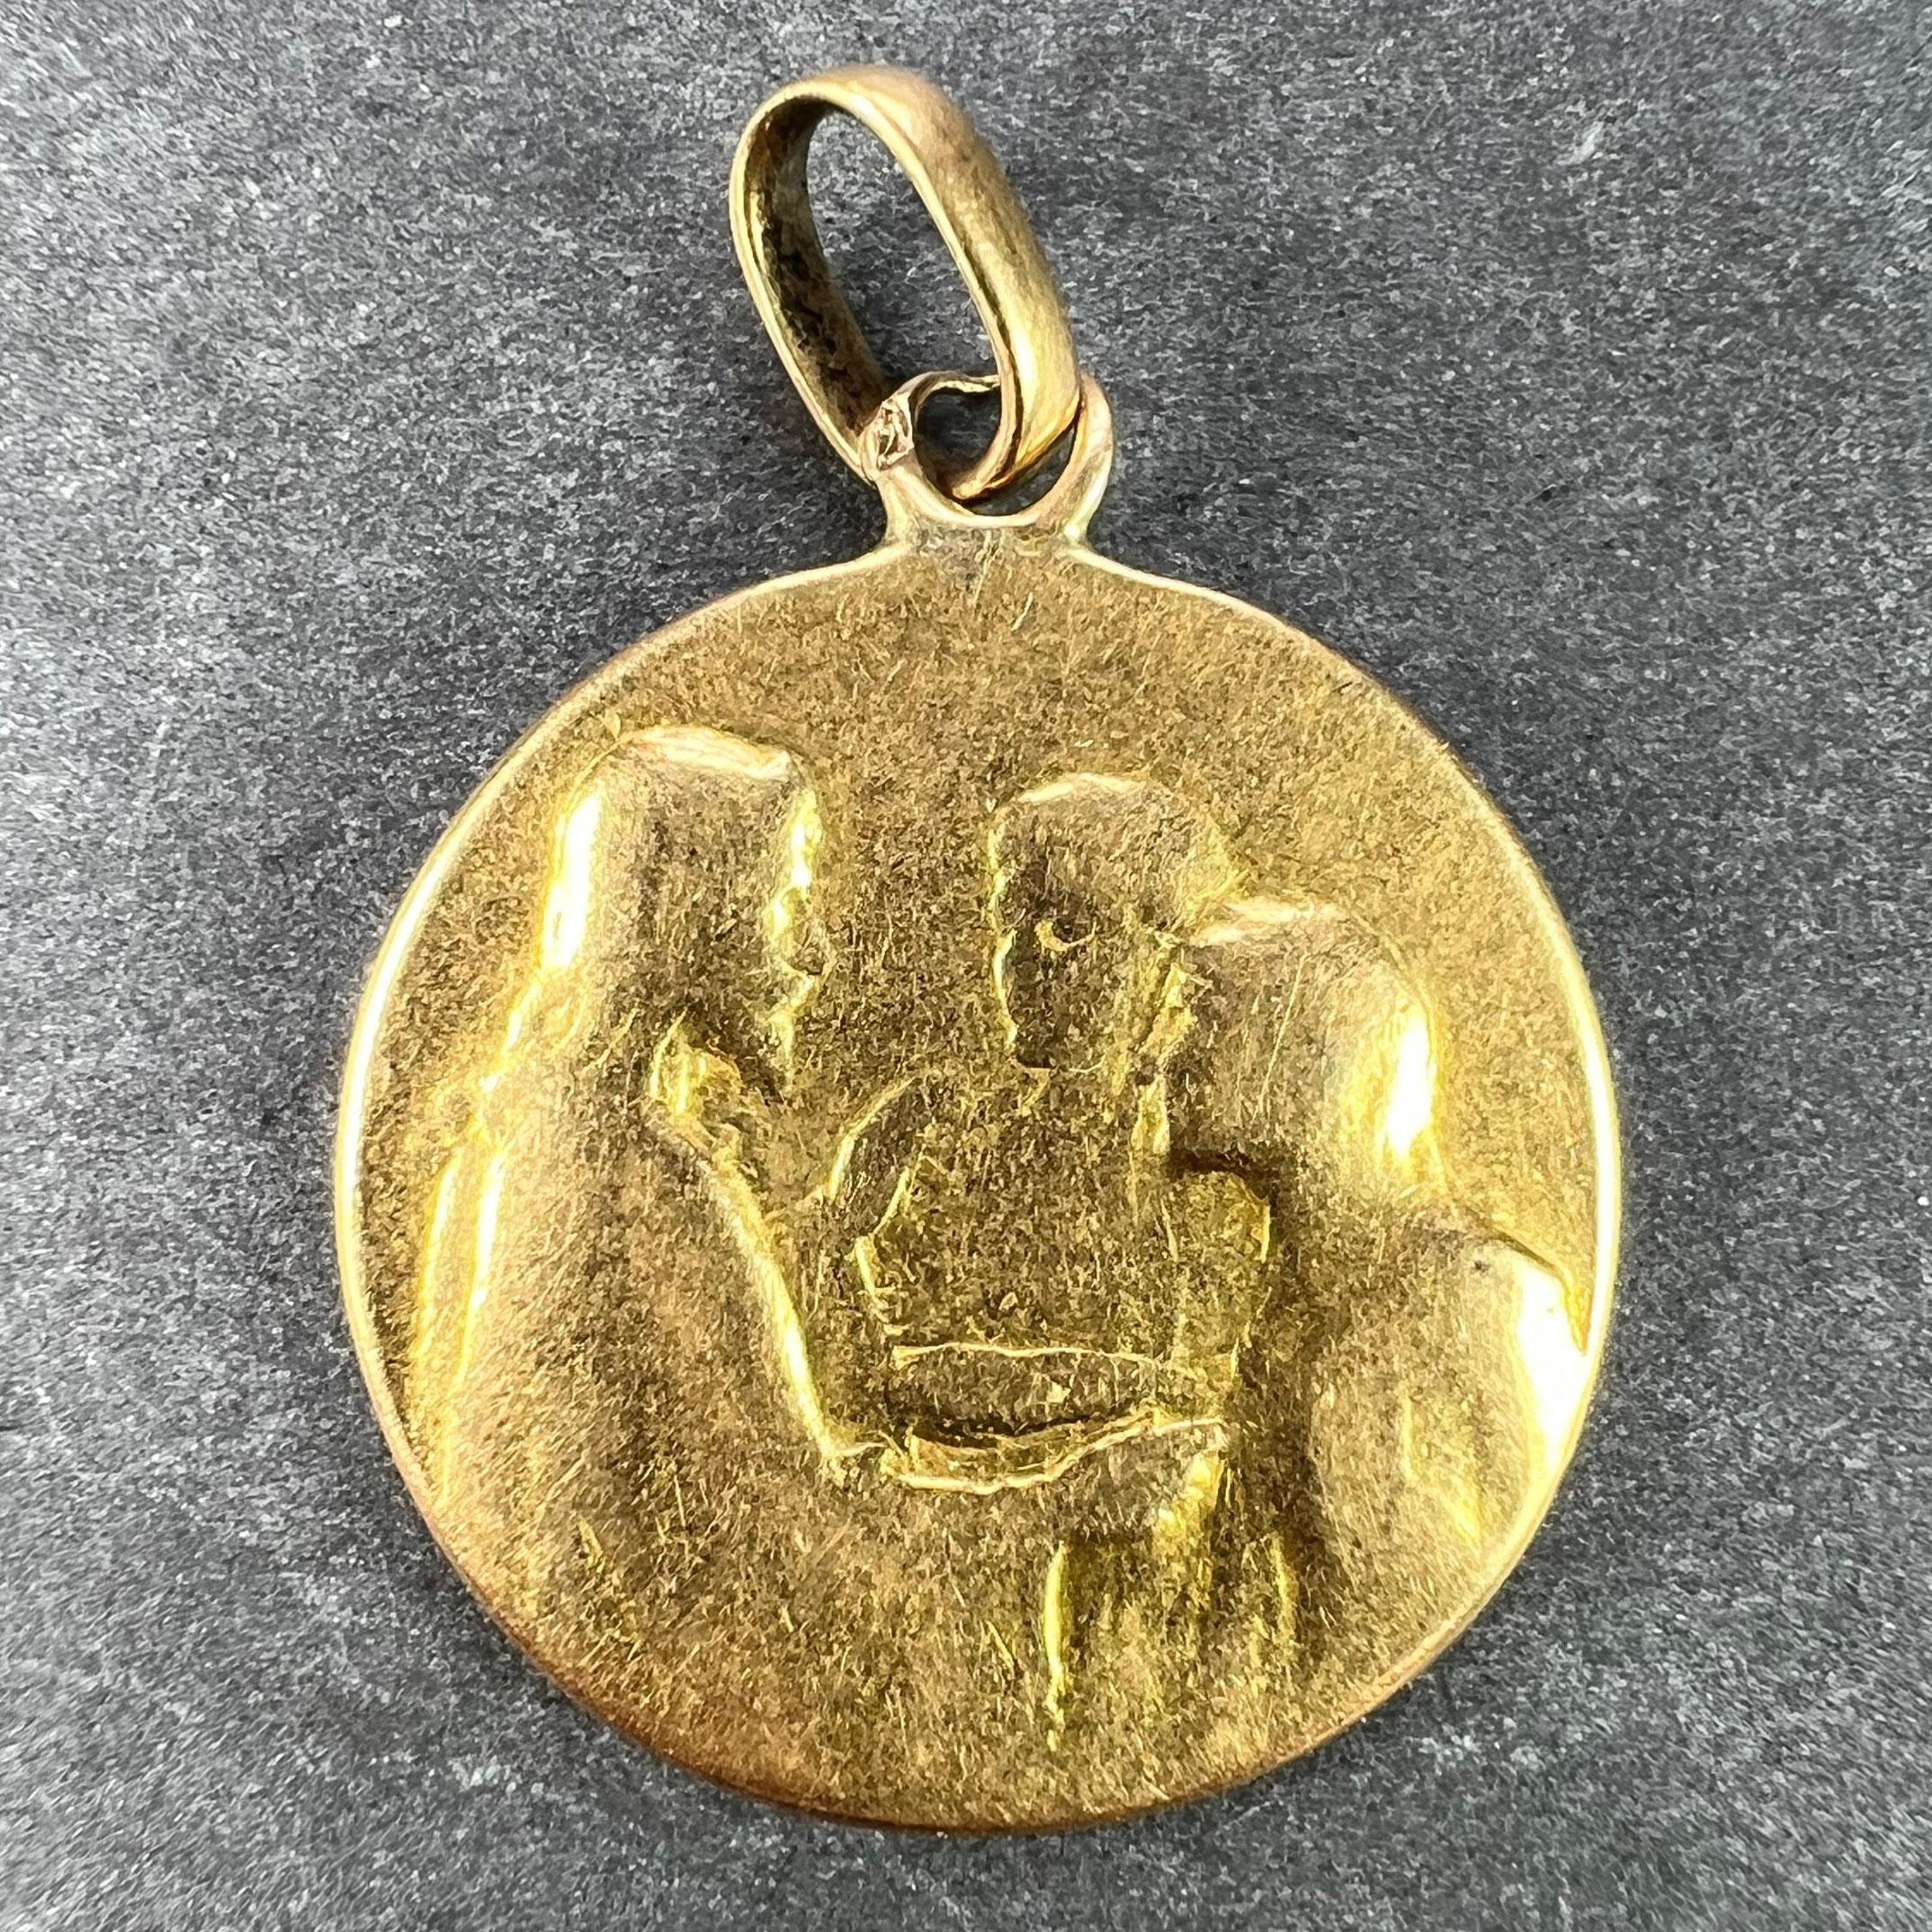 A French 18 karat (18K) yellow gold charm wedding pendant designed as a medal depicting Jesus Christ blessing the marriage of a man and woman. The reverse depicts a sheaf of roses and lilies, engraved with the initials PM MG and the date 20 Mai